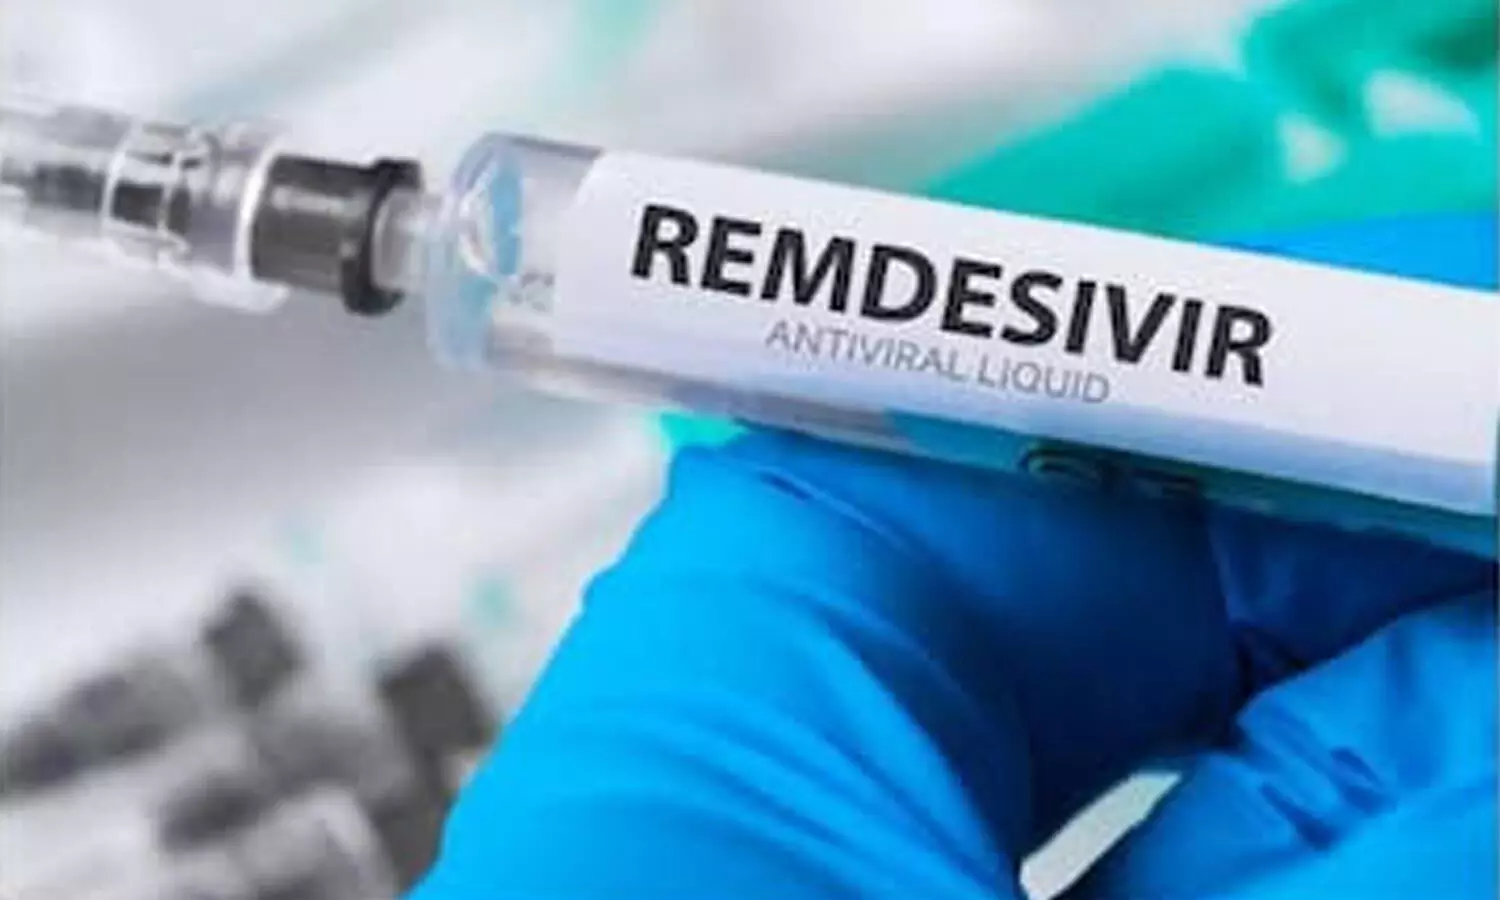 Chemotherapy drug originally developed to treat lymphoma outperforms Remdesivir against COVID